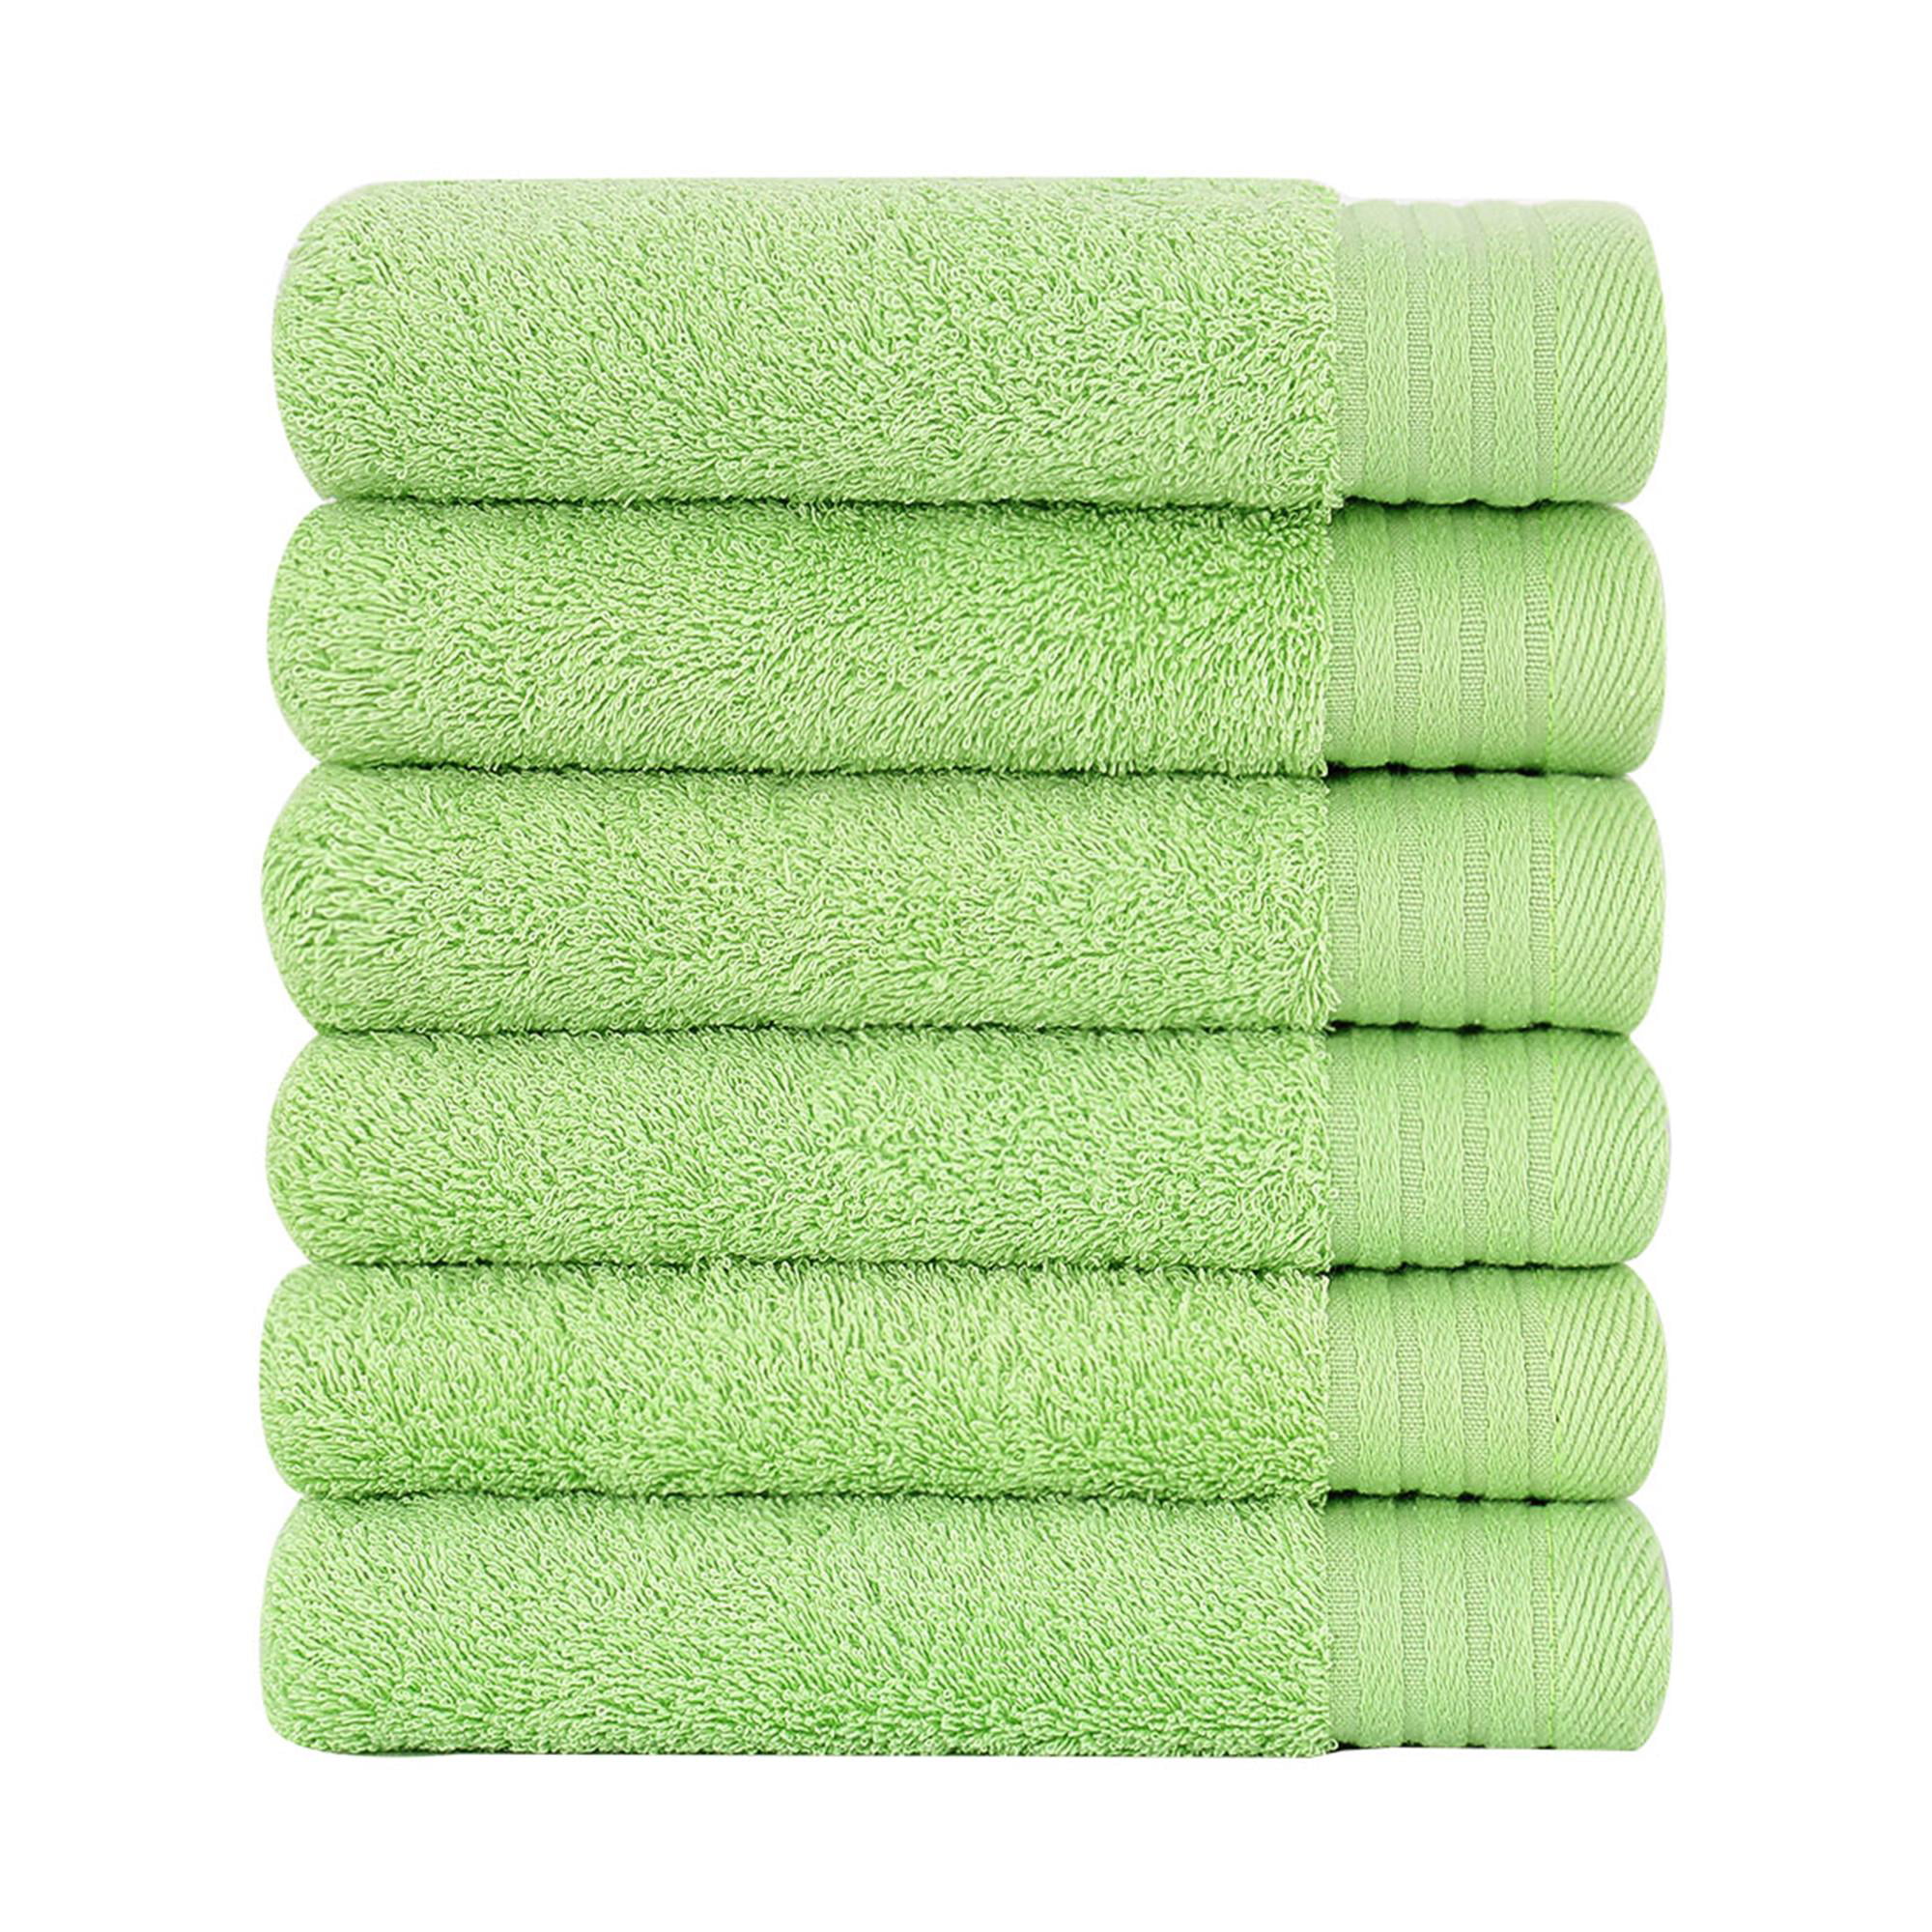 Lime Green Hand Towels 16 x 27 %%page%% - %%sitename%% - Wholesale Towel,  Inc.